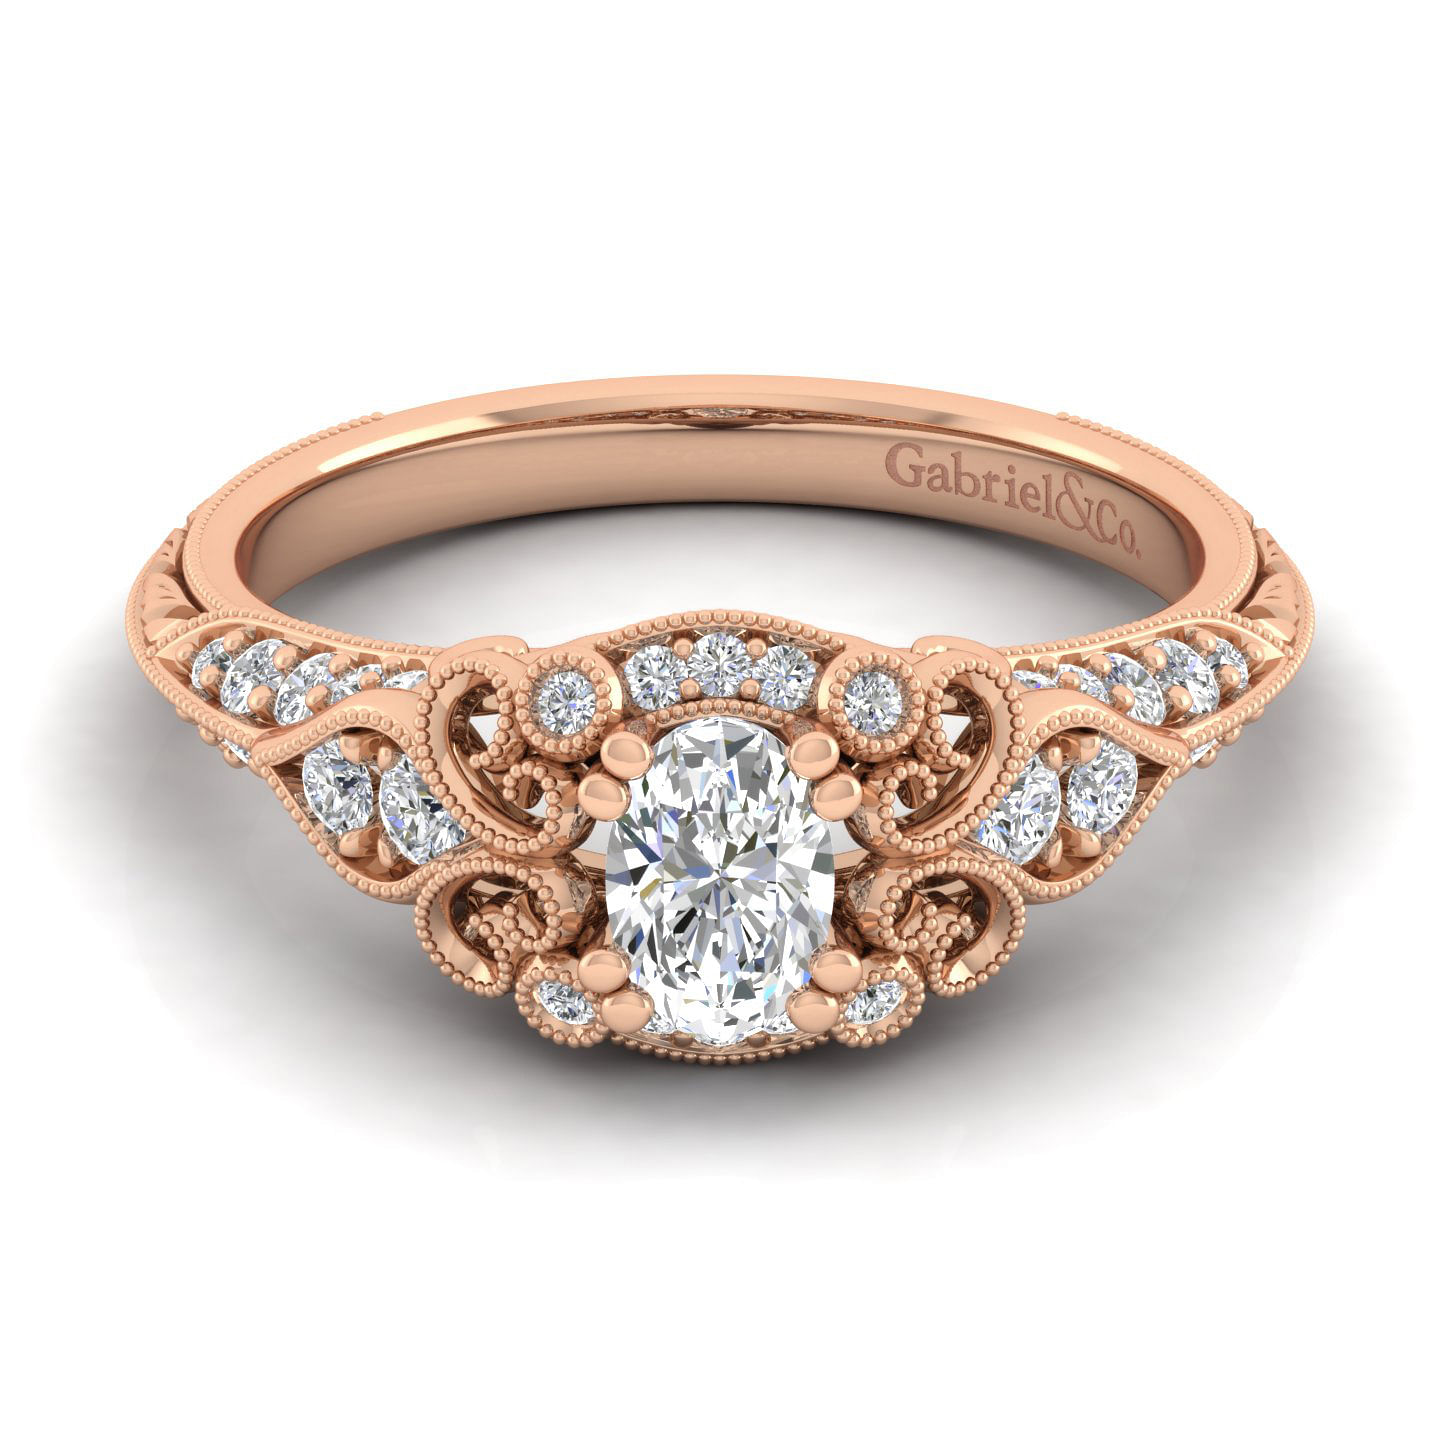 Unique 14K Rose Gold Vintage Inspired Oval Diamond Halo Engagement Ring